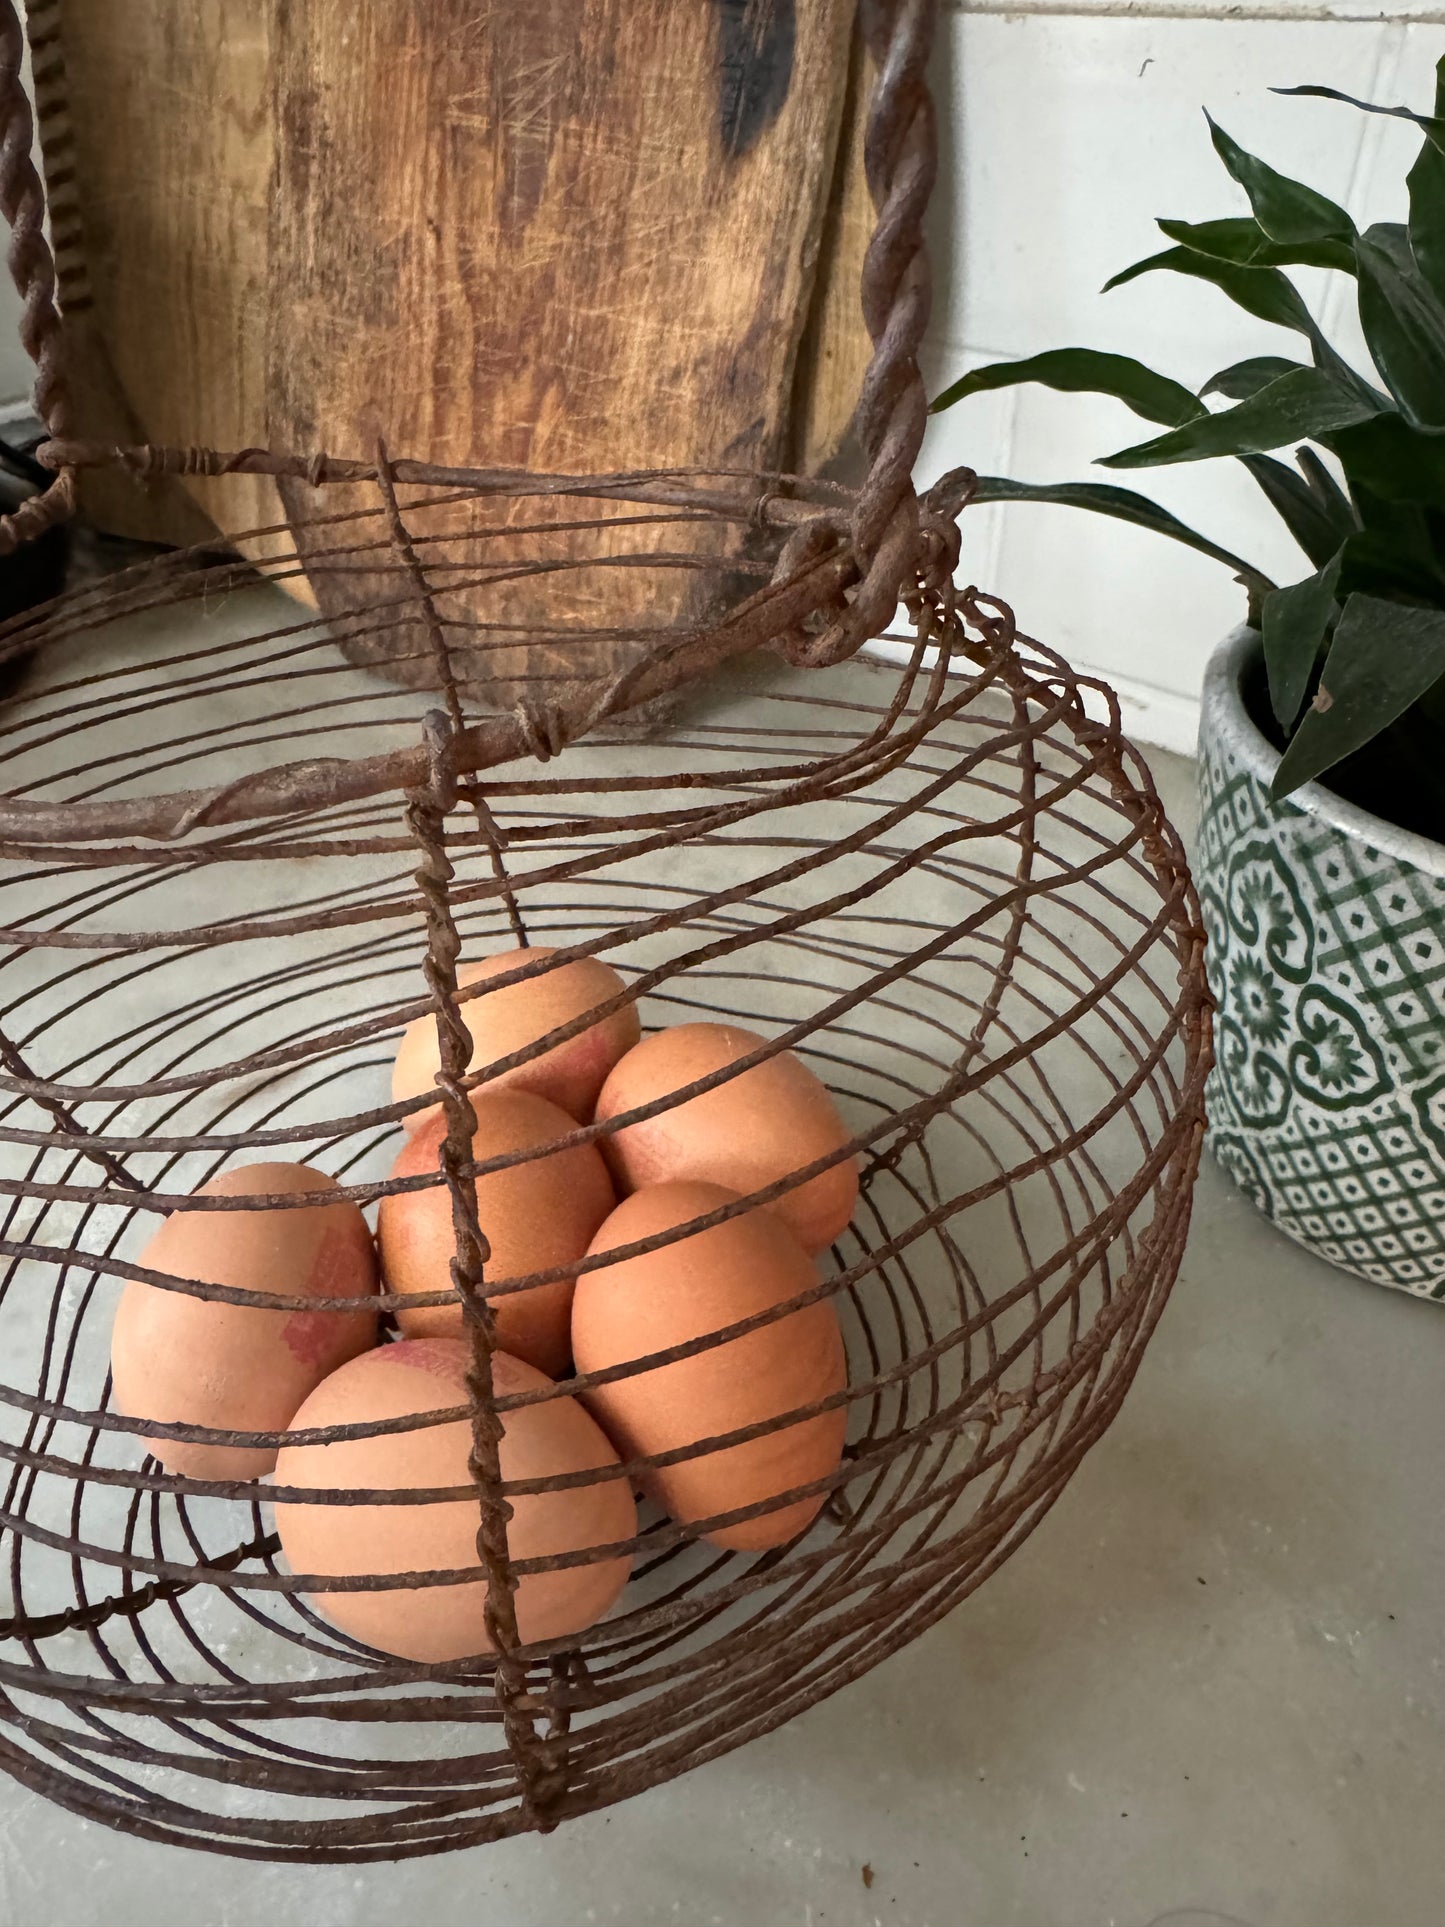 Vintage French wire egg basket